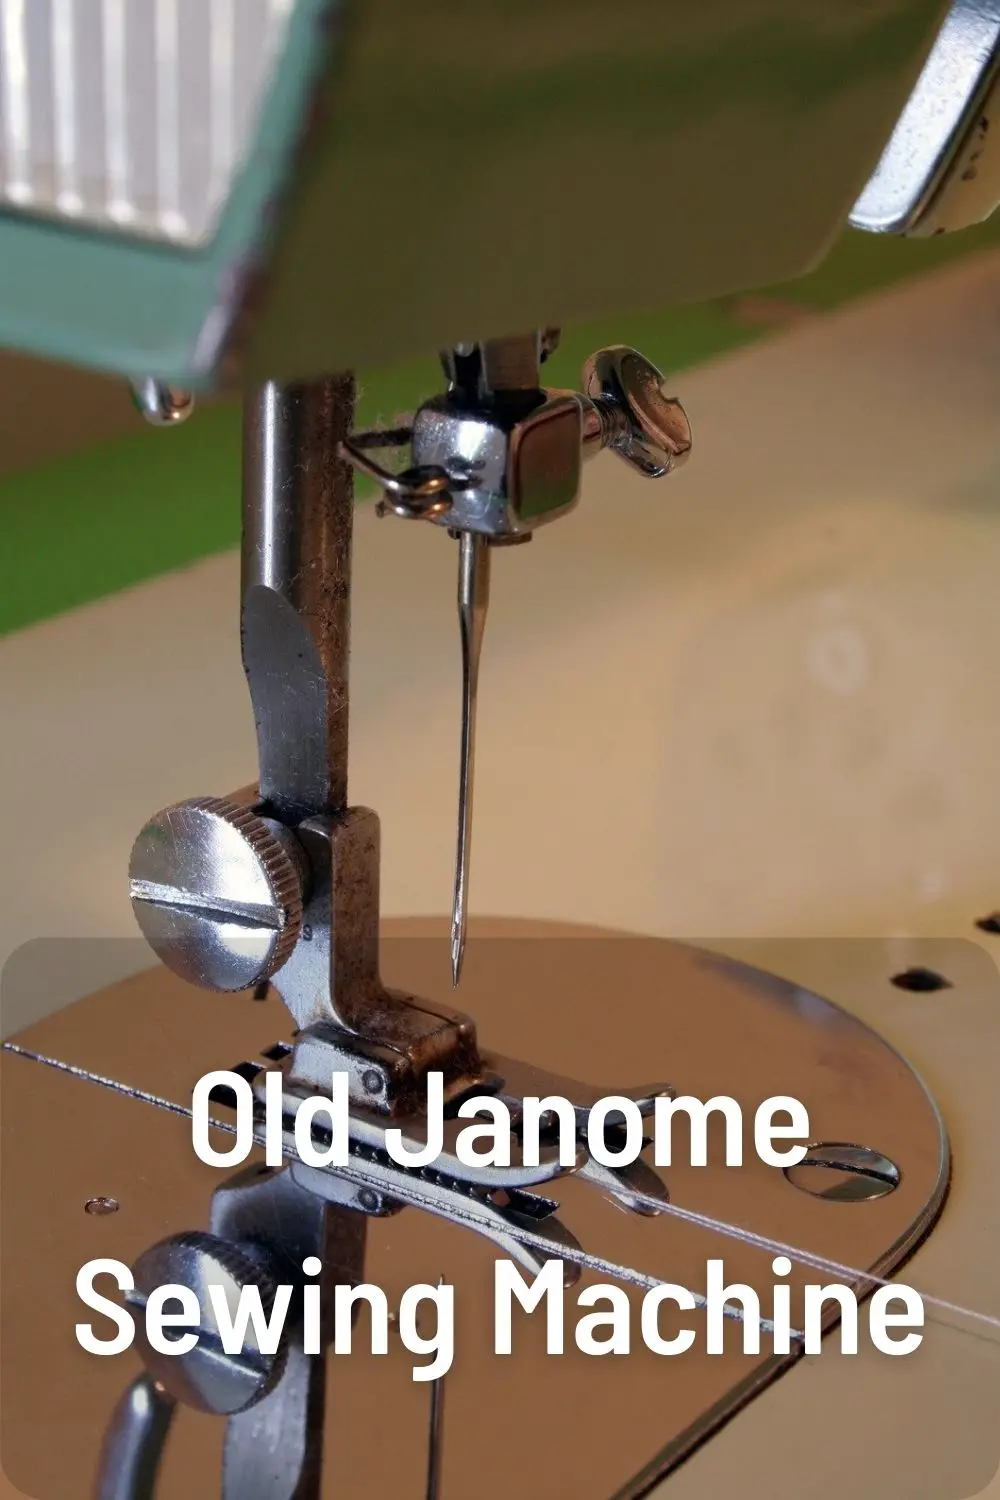 Old Janome Sewing Machine